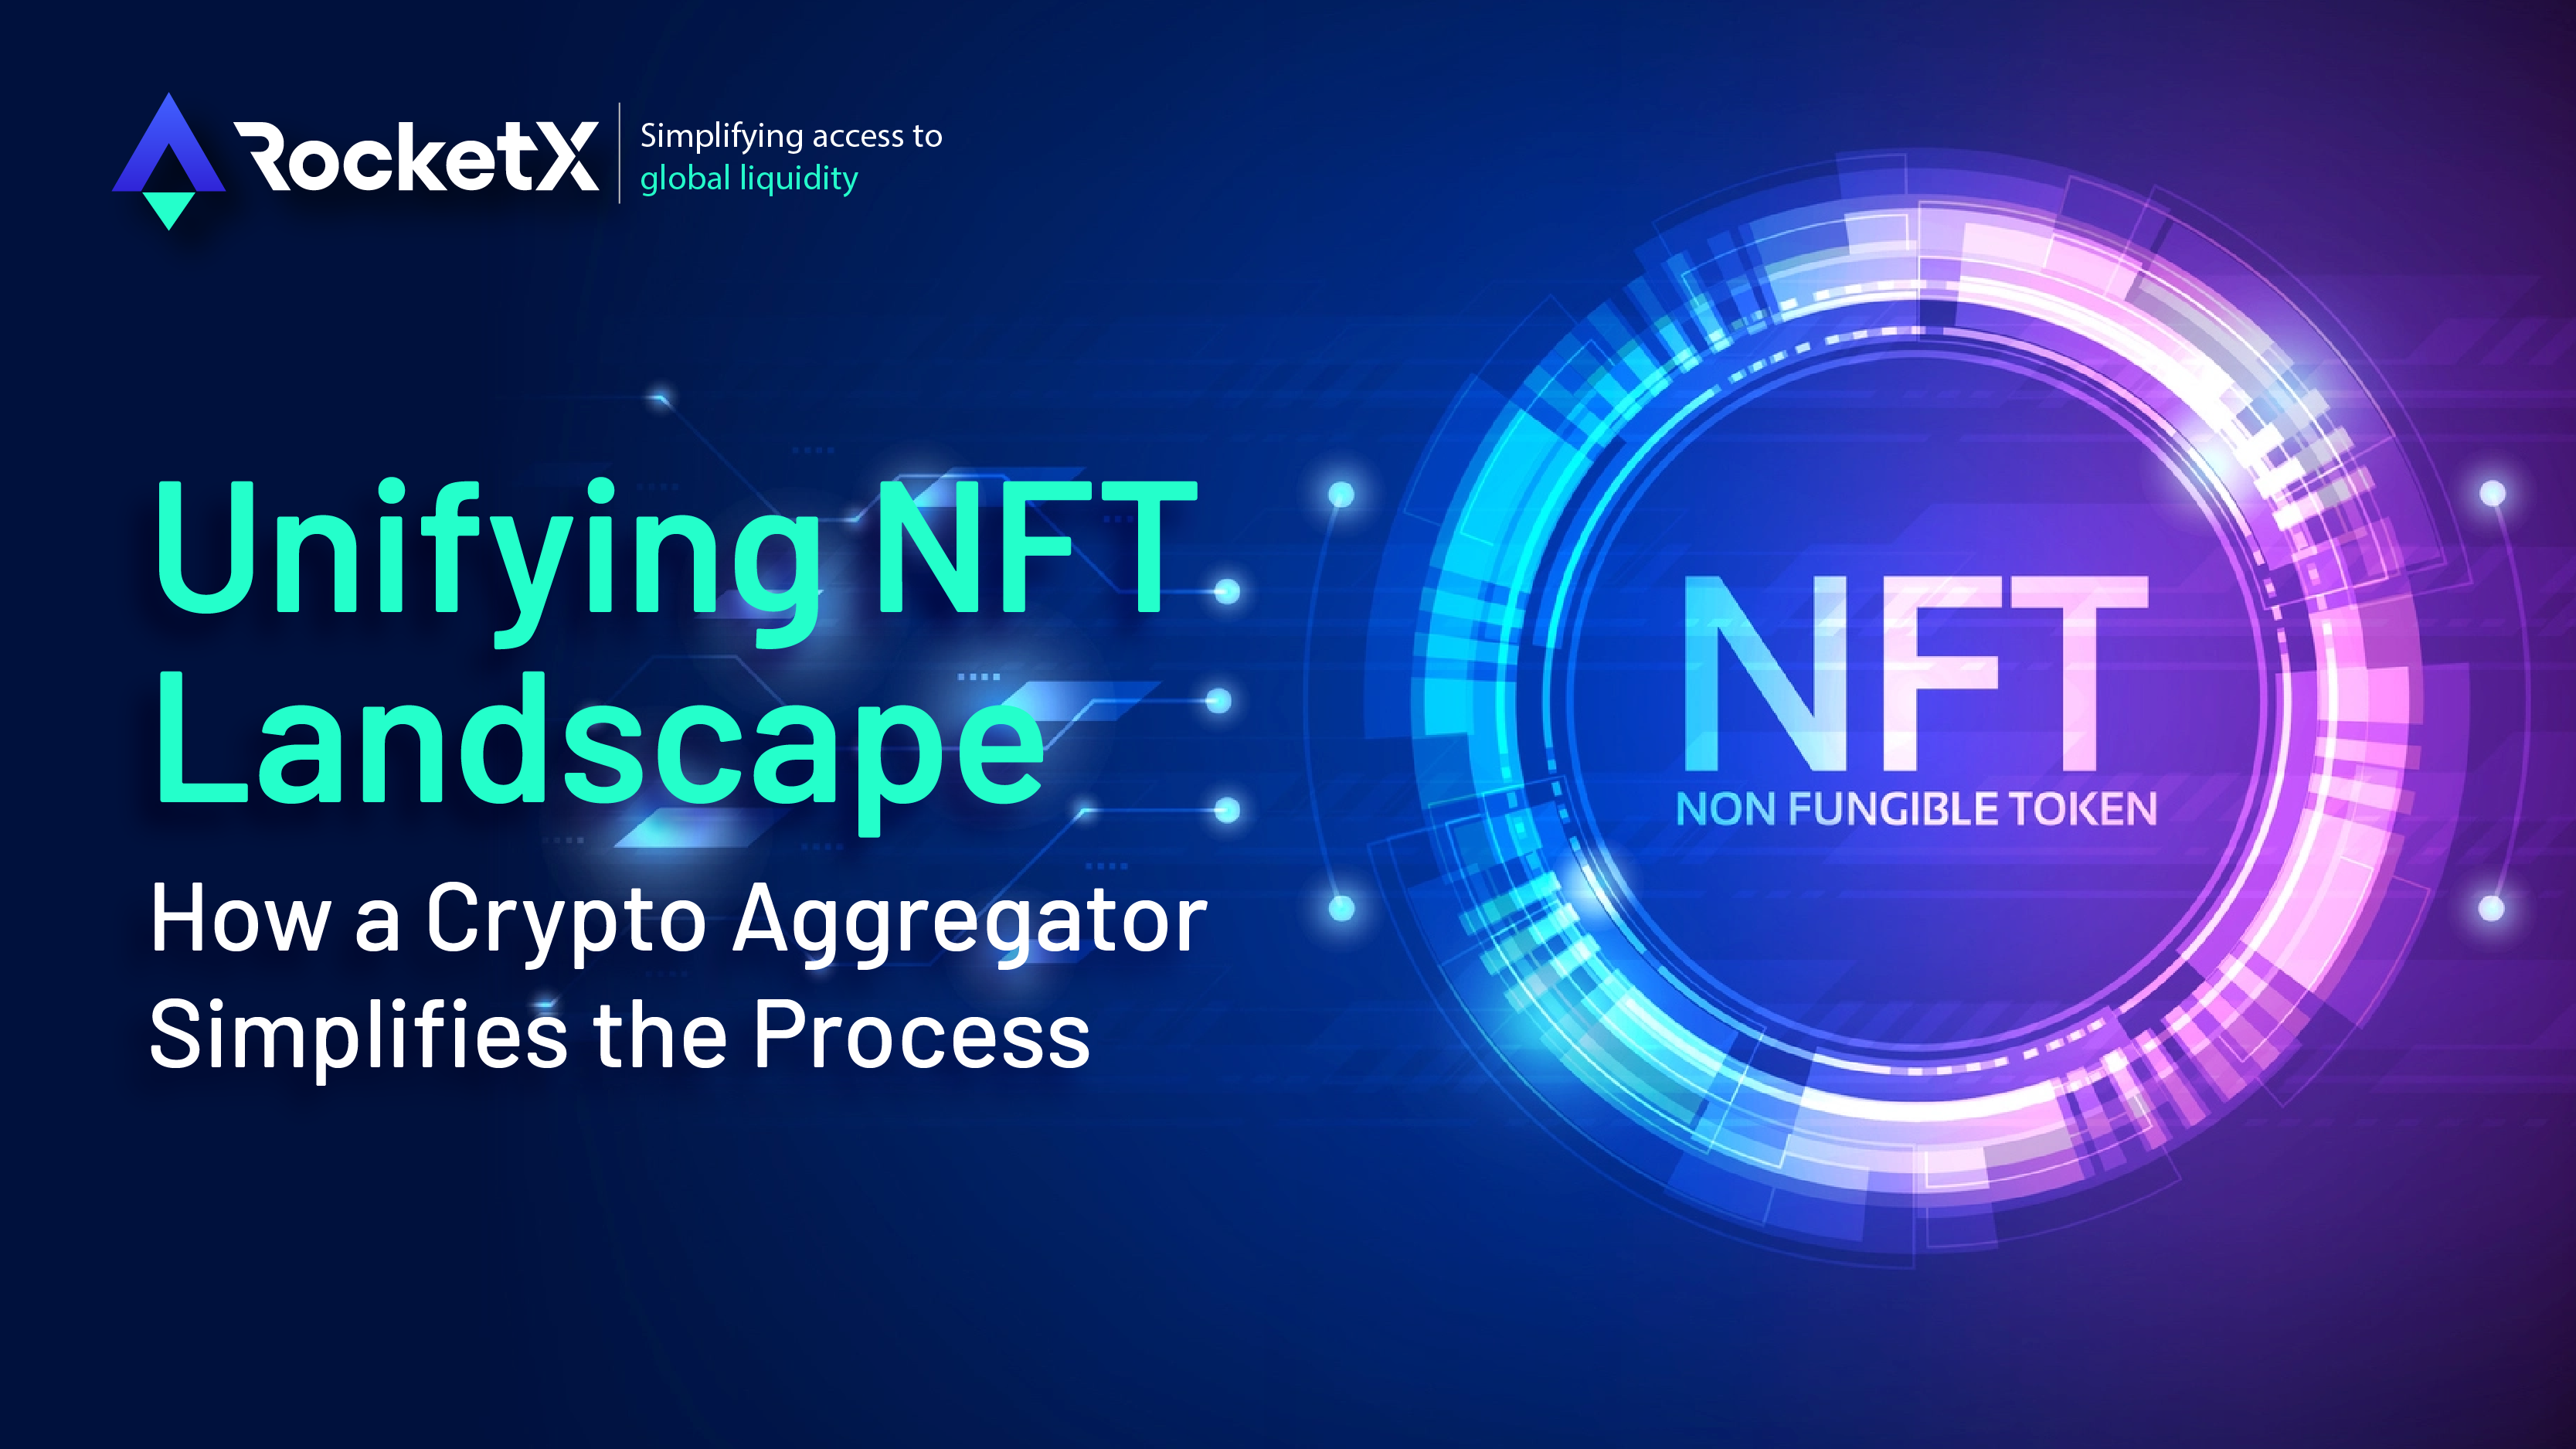 Unifying the NFT Landscape: How A Crypto Aggregator Simplifies the Process